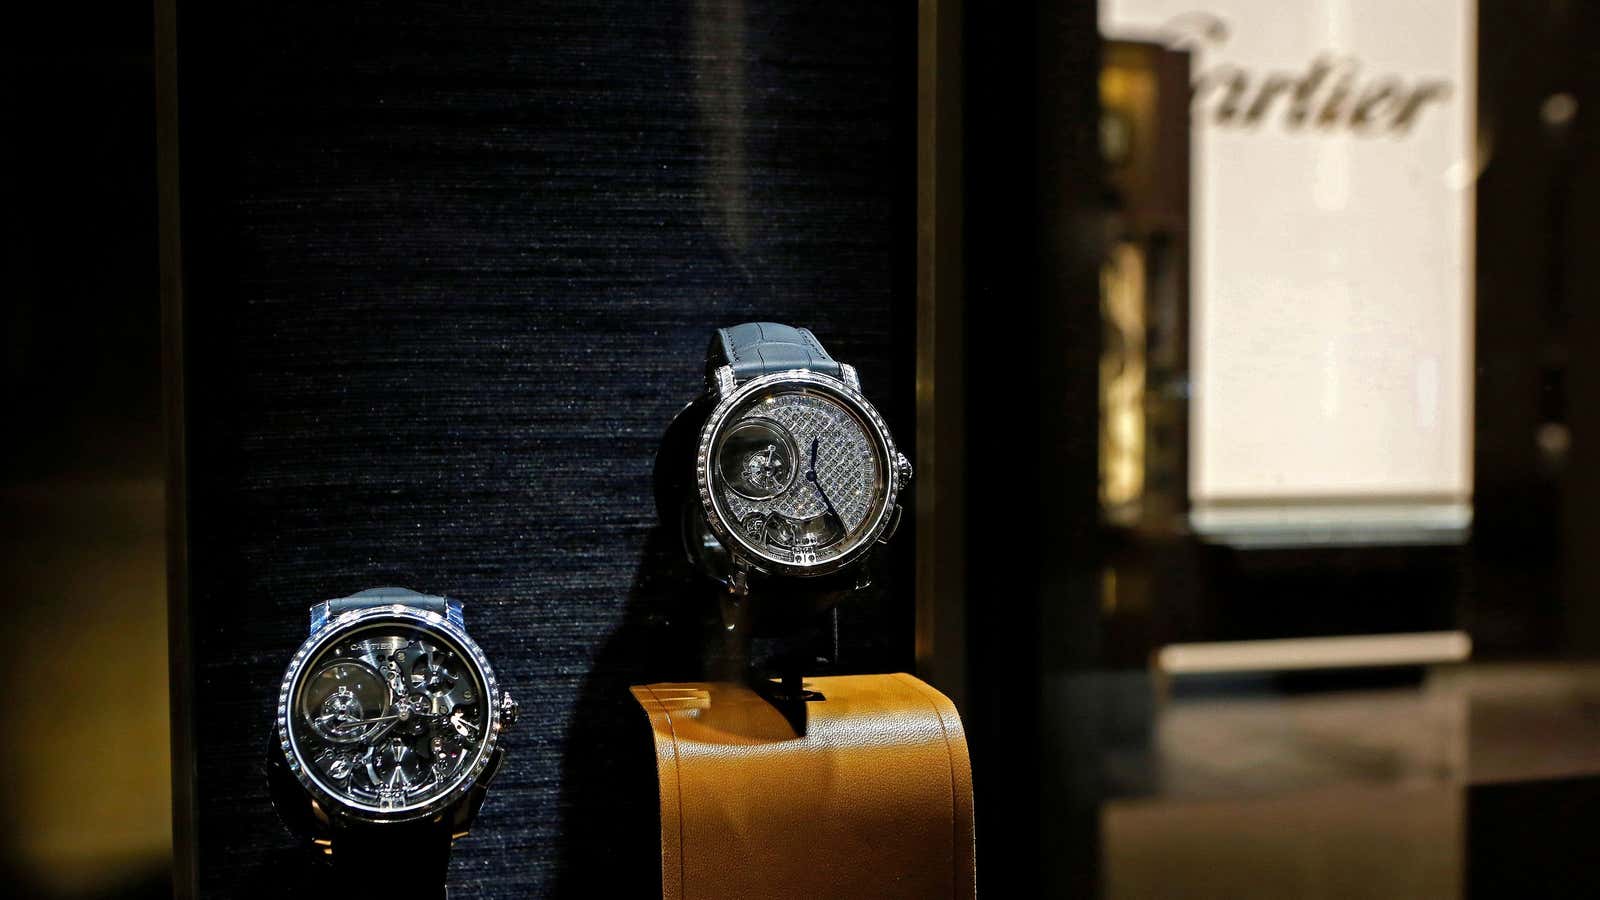 Why Richemont is destroying unsold Cartier and Piaget watches